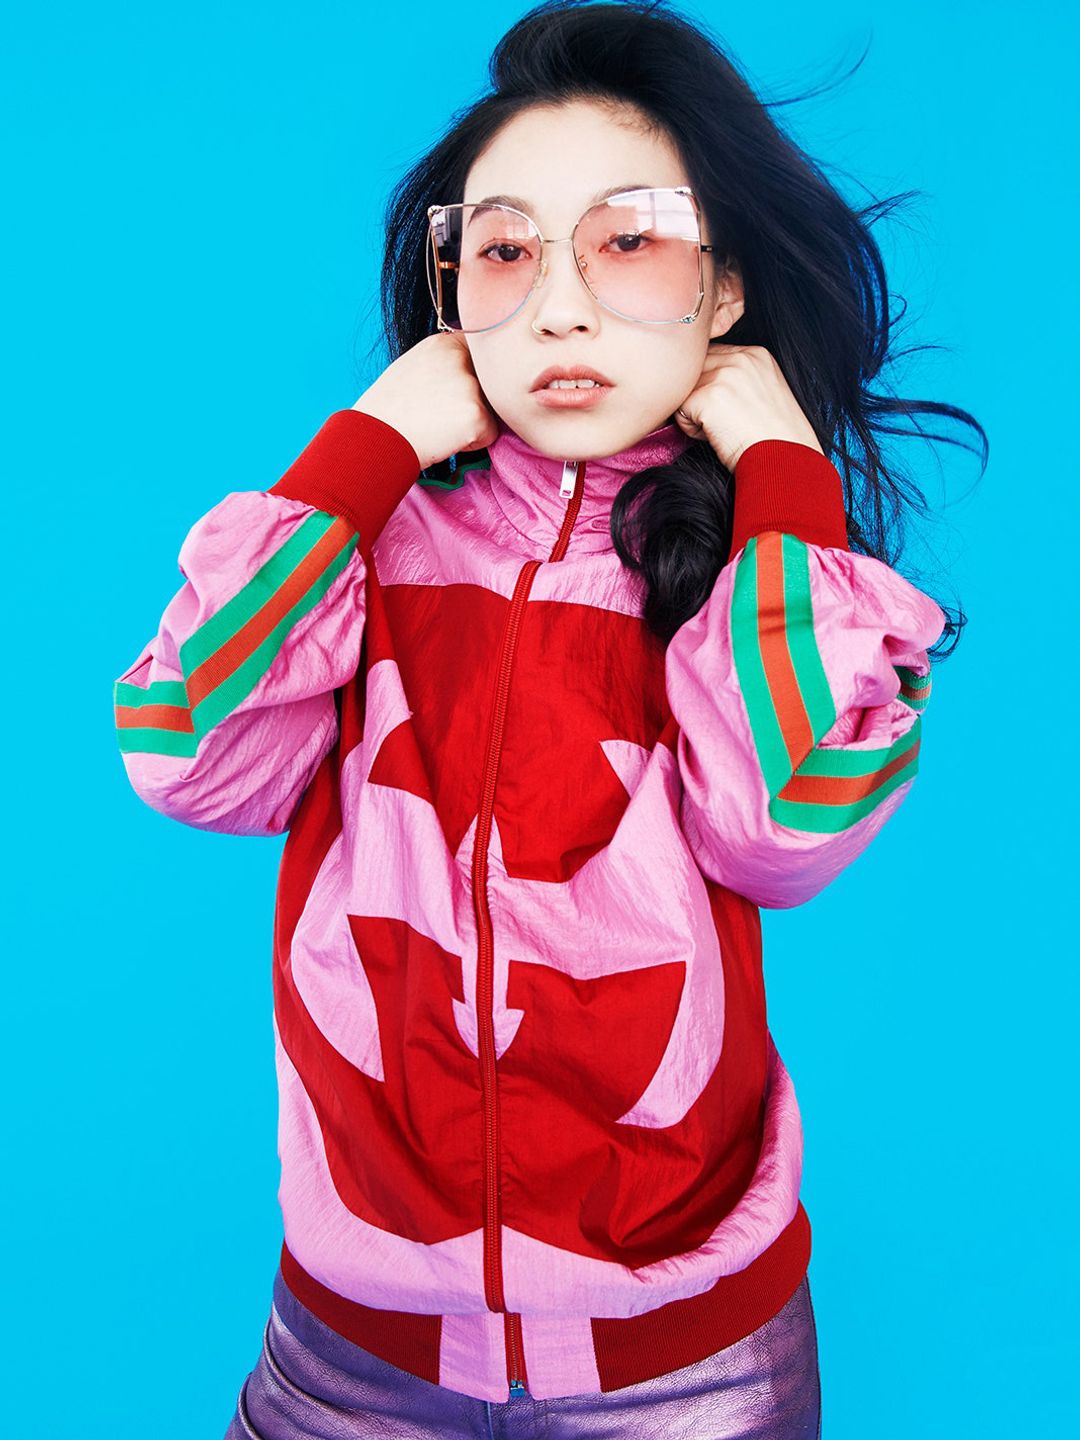 Awkwafina who is her mother